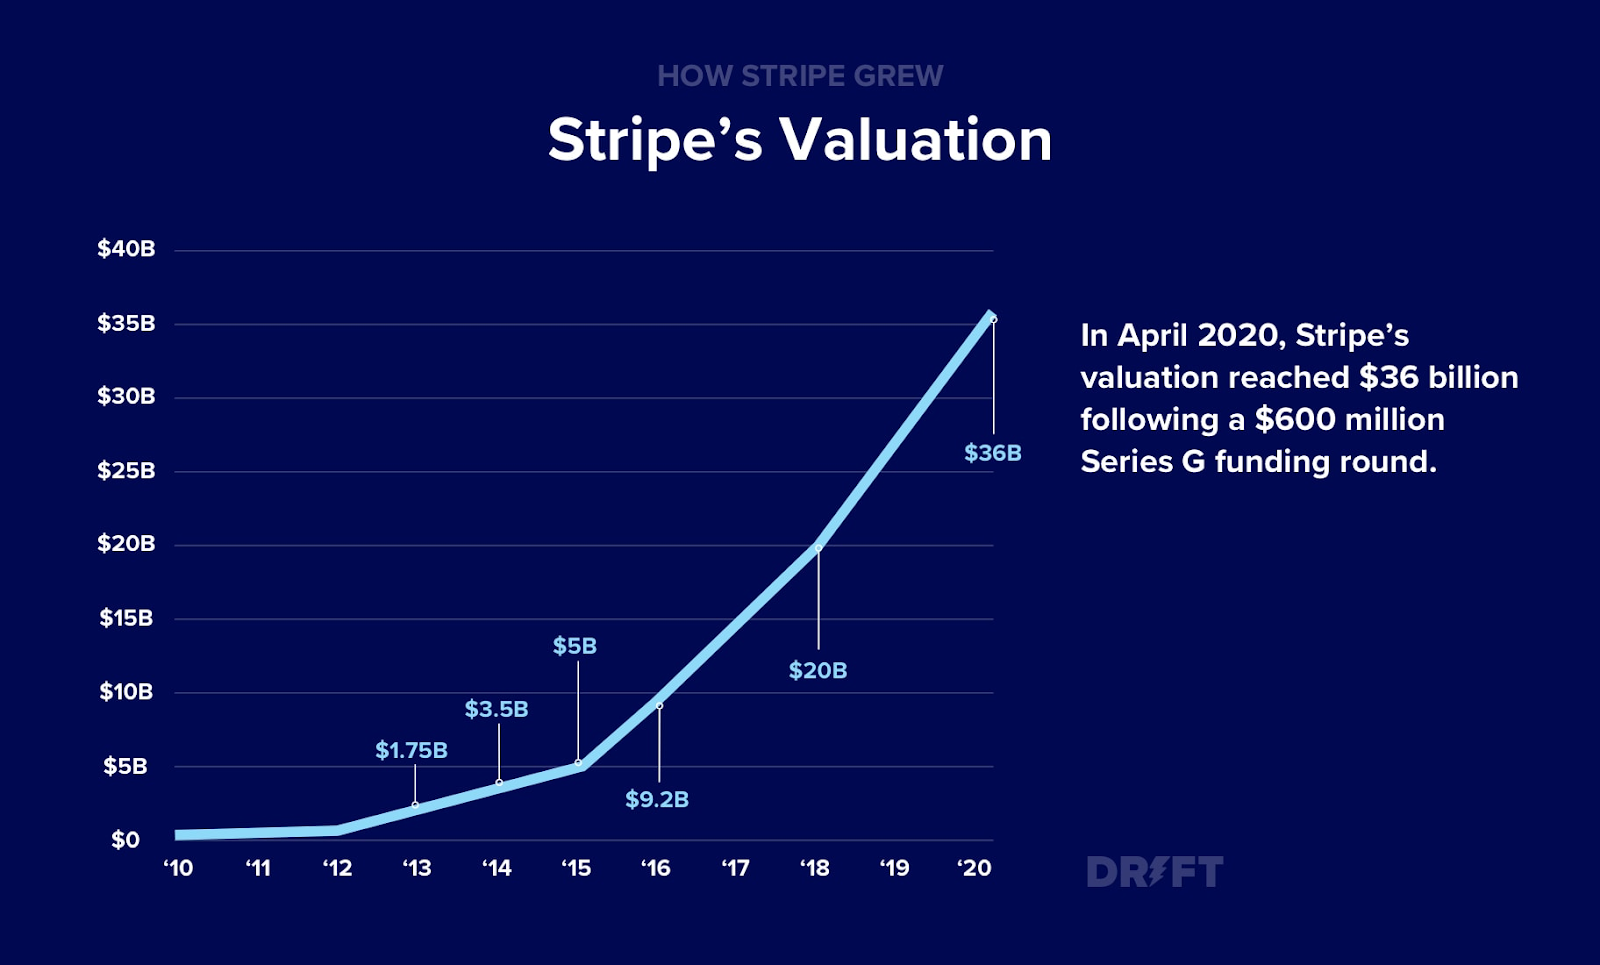 The valuation of Stripe over the years